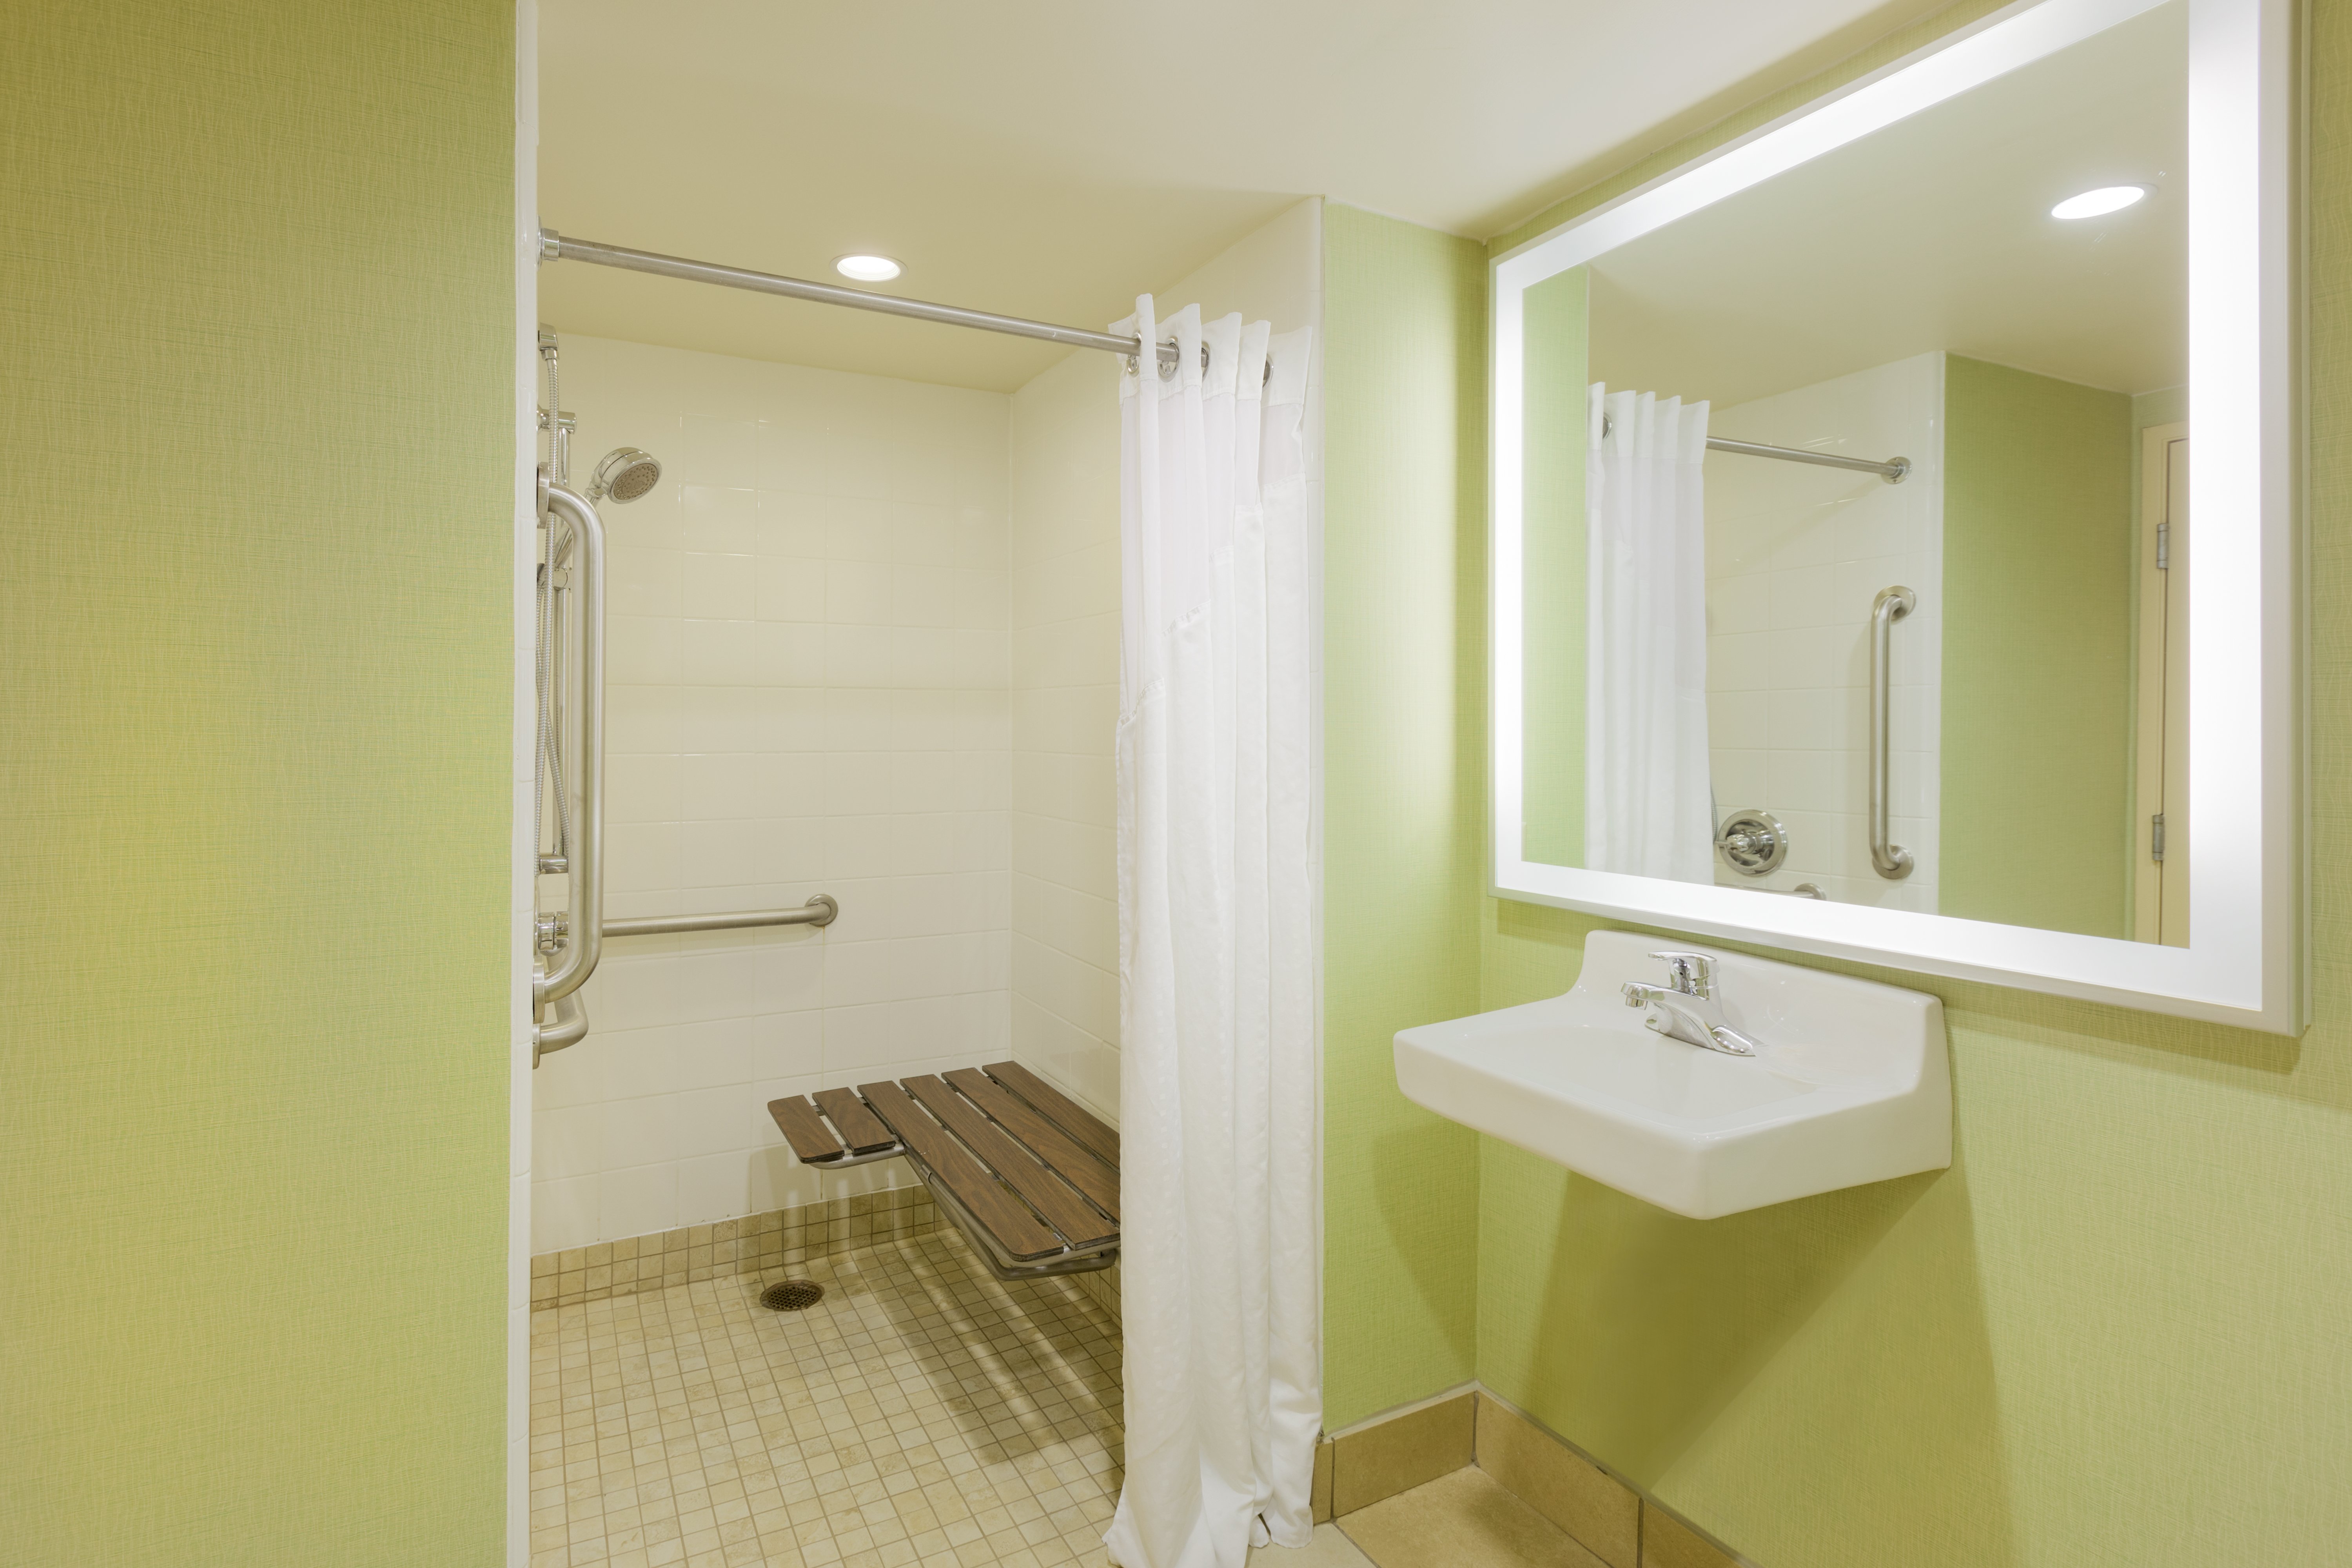 Accessible Guest Bathroom with roll-in shower